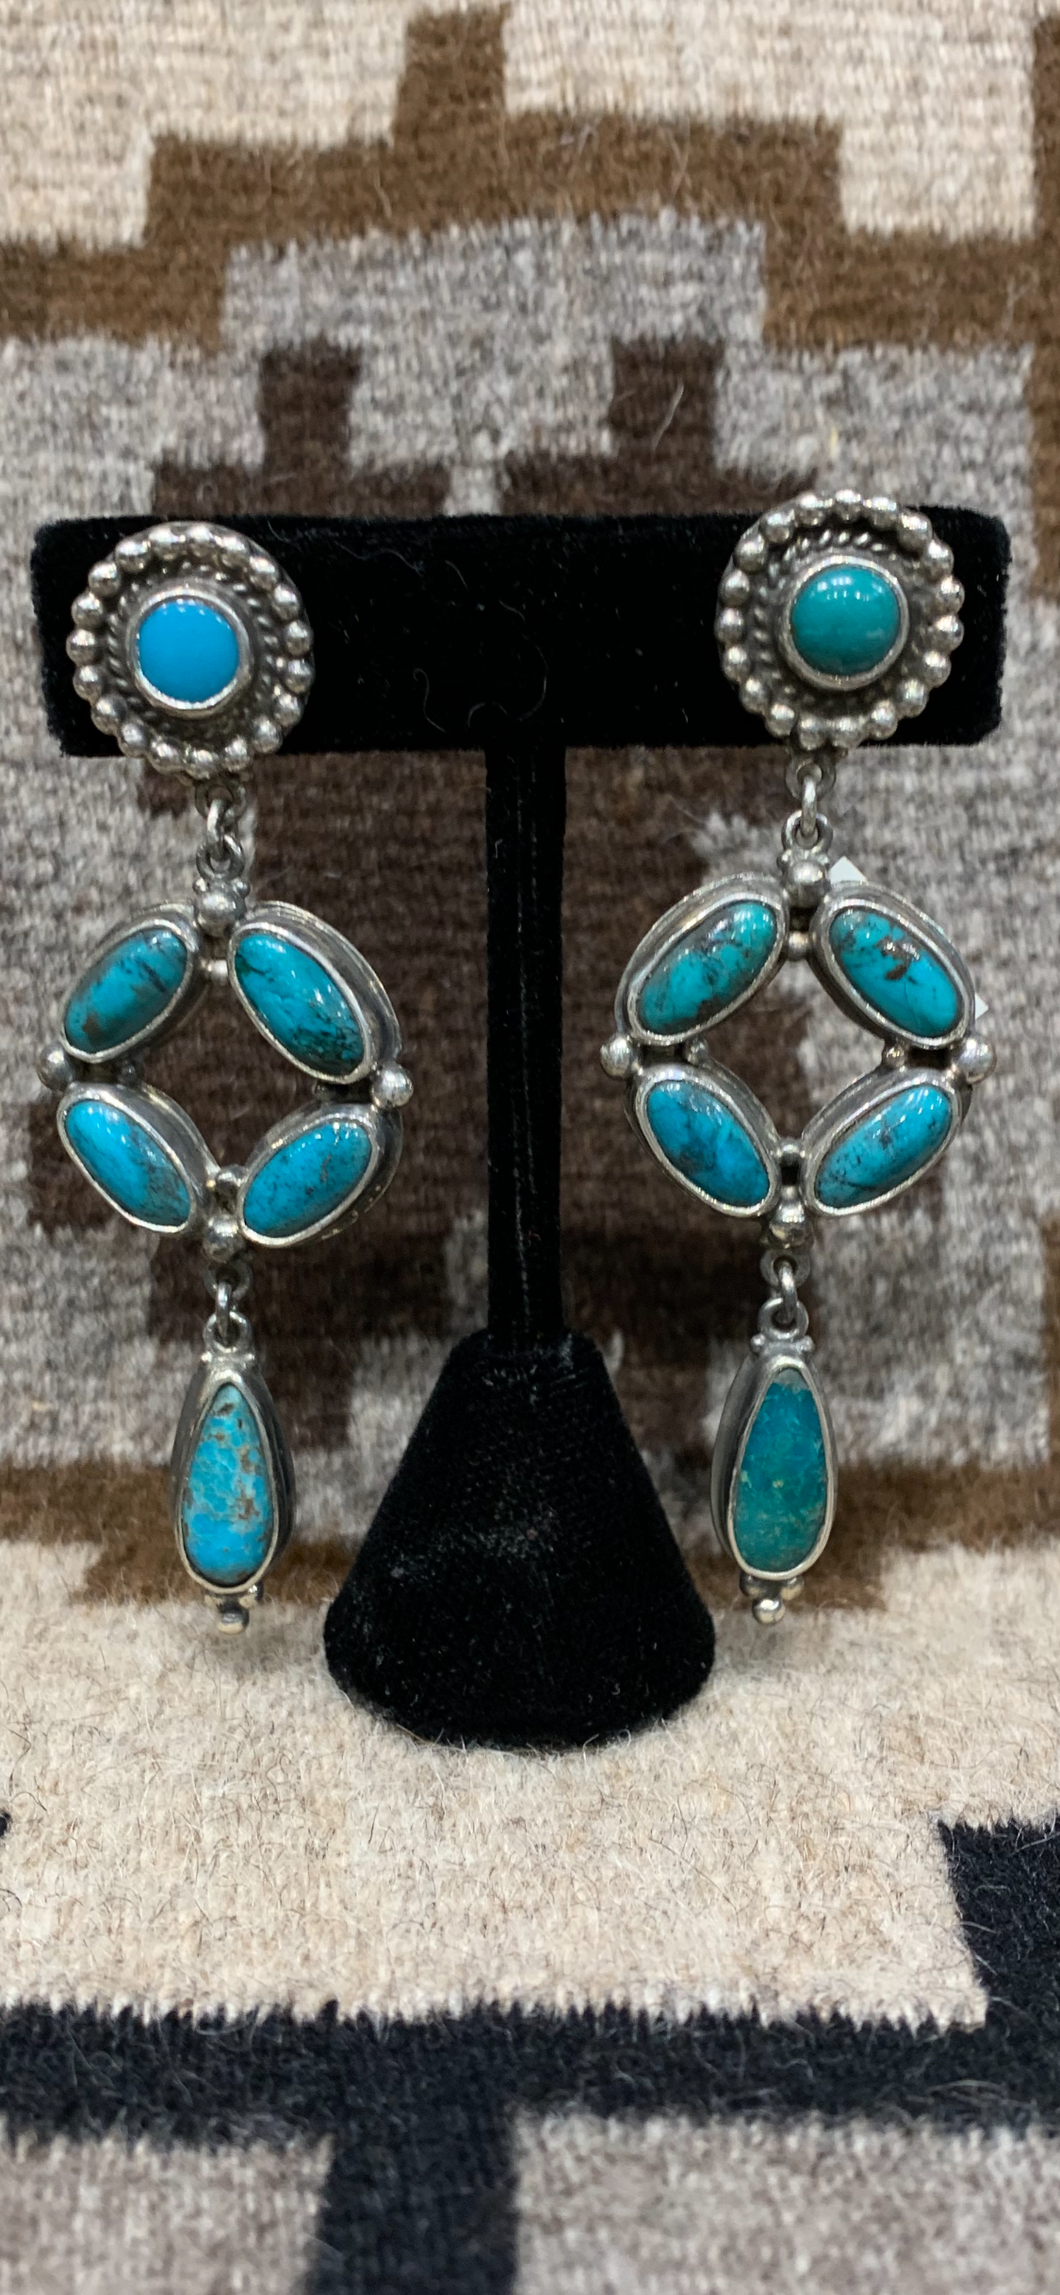 Turquoise Earrings by Ron Wesley